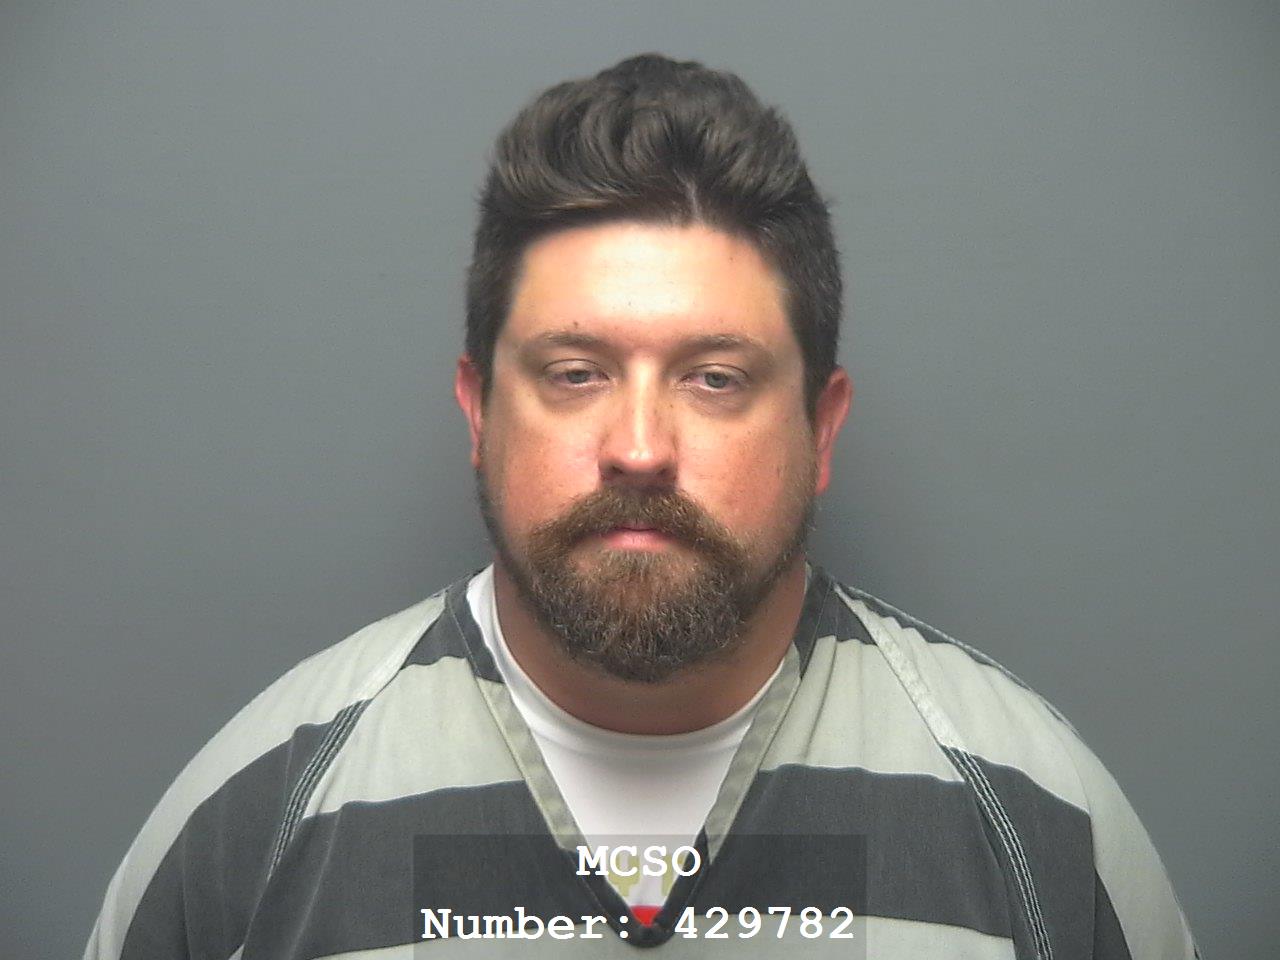 Former head baseball coach at Conroe ISD high school gets 7 years for  online solicitation of a minor